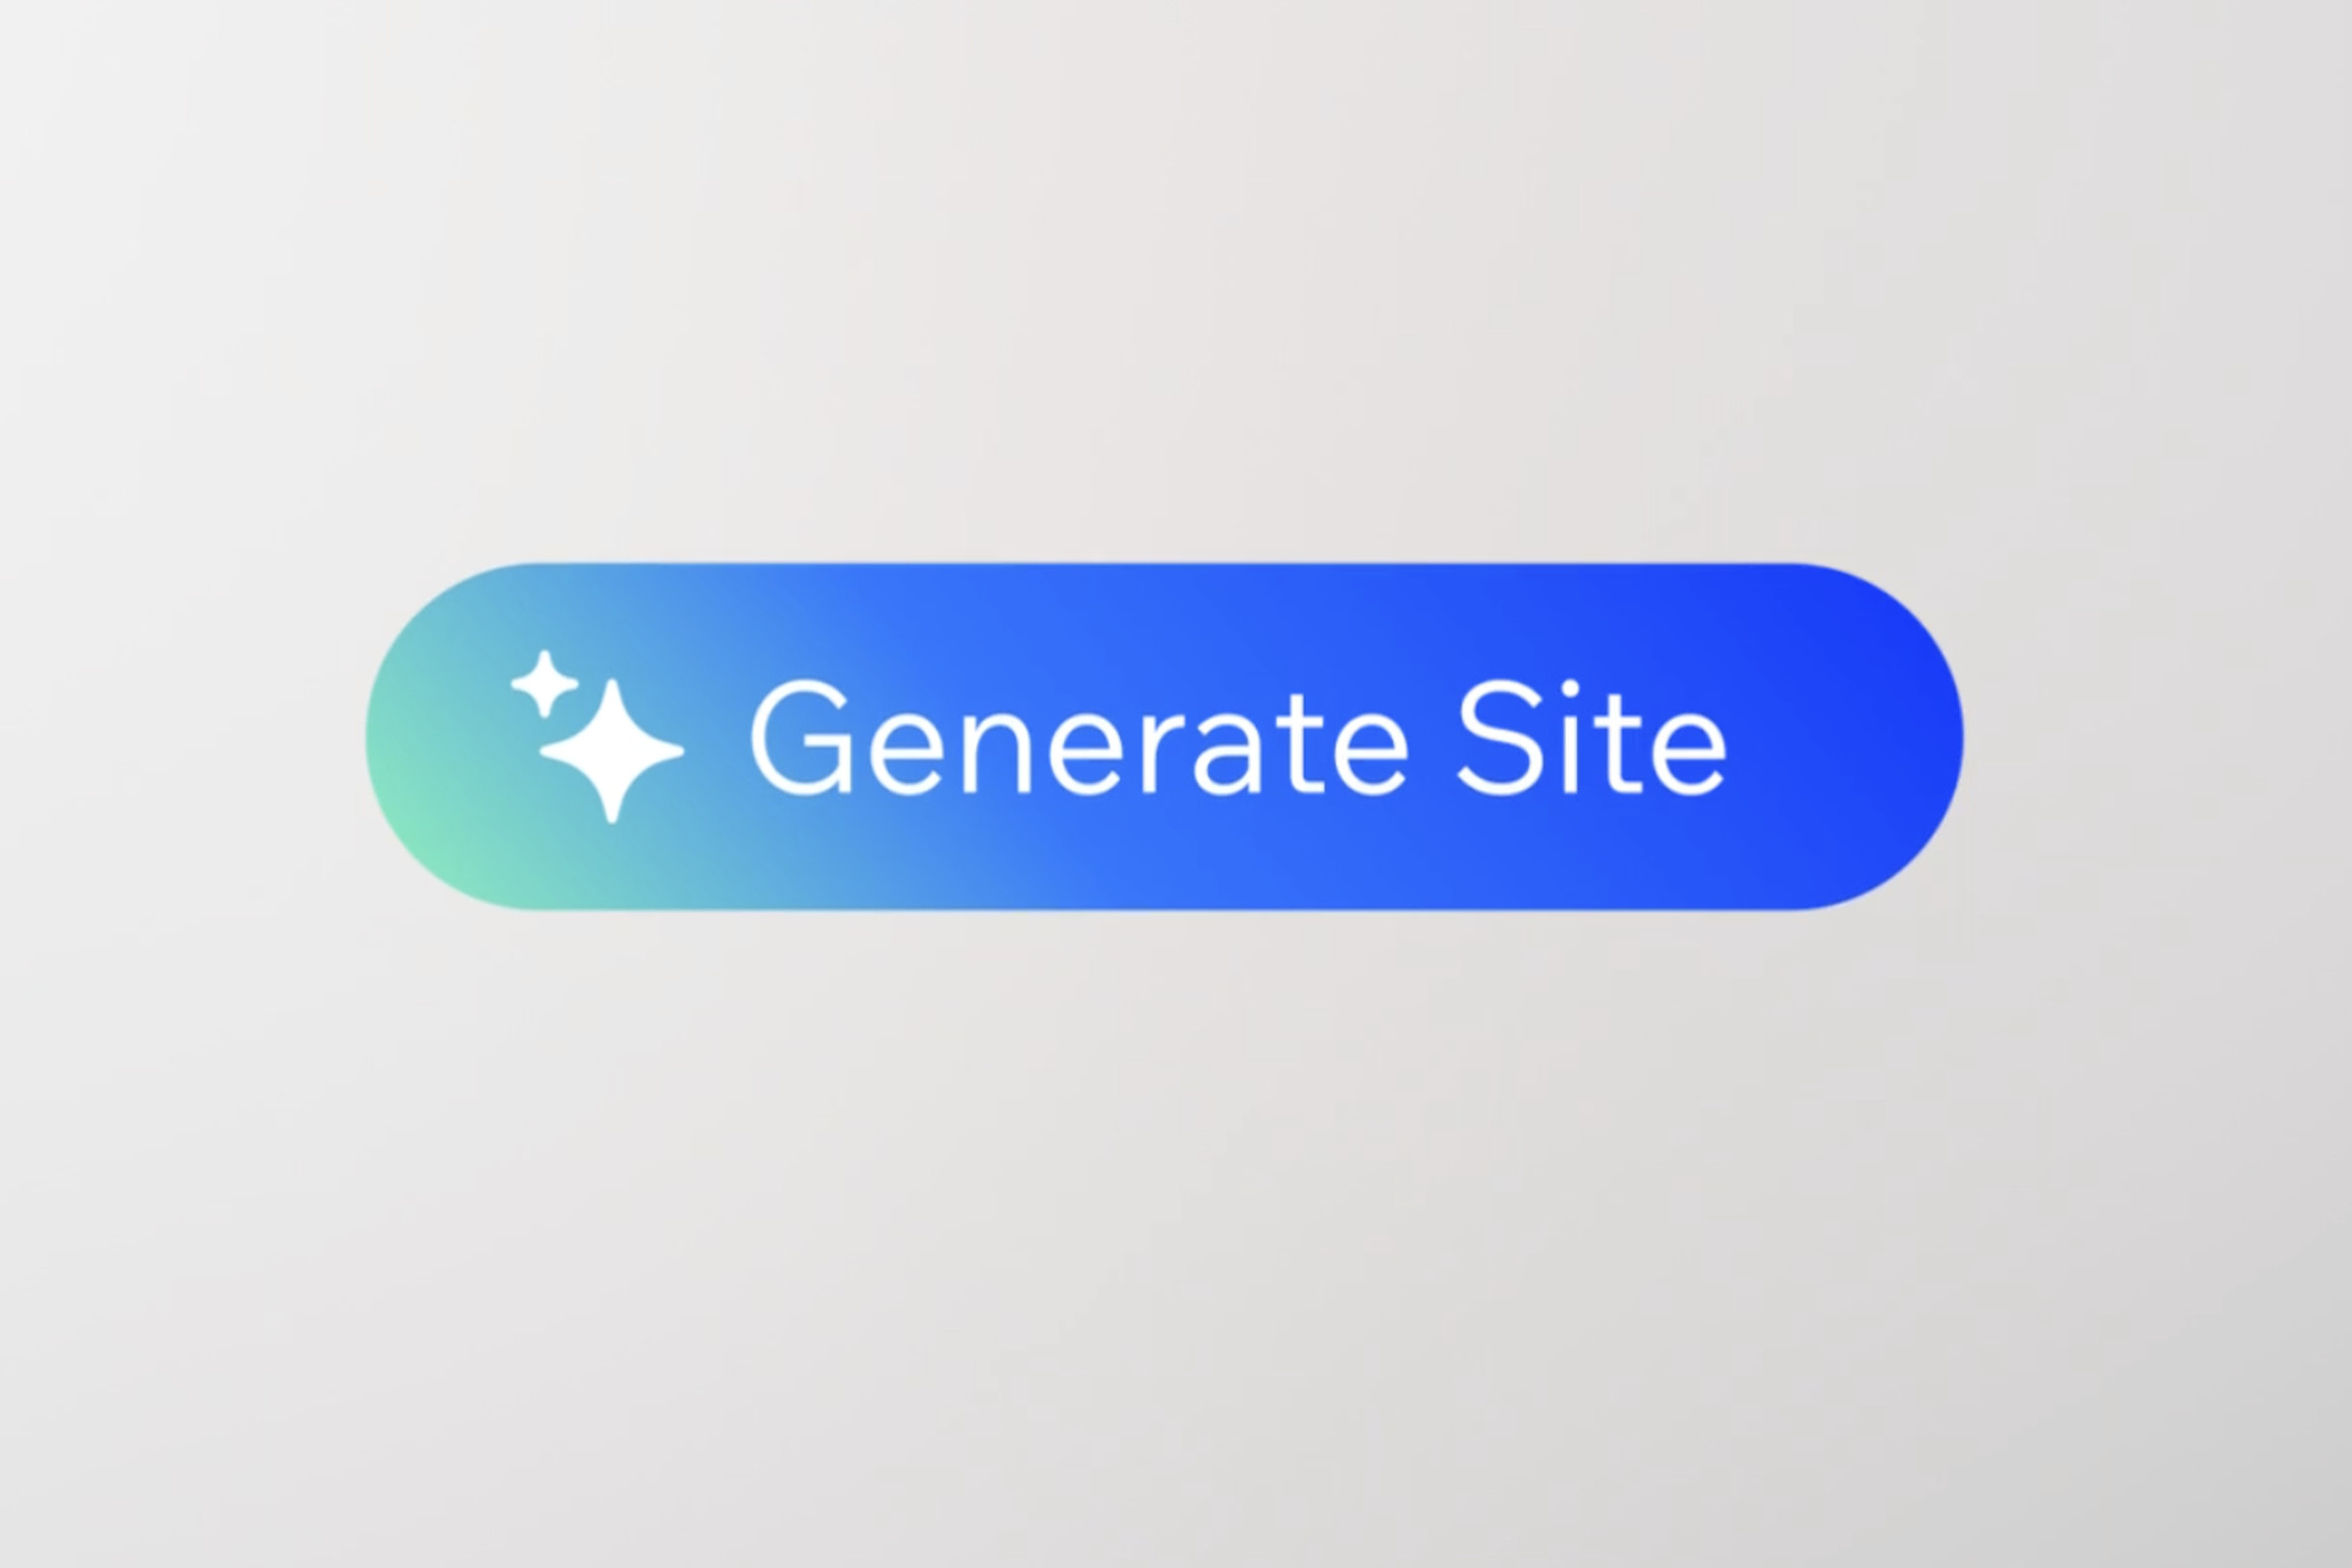 The “Generate Site” button for Wix’s AI webpage builder.